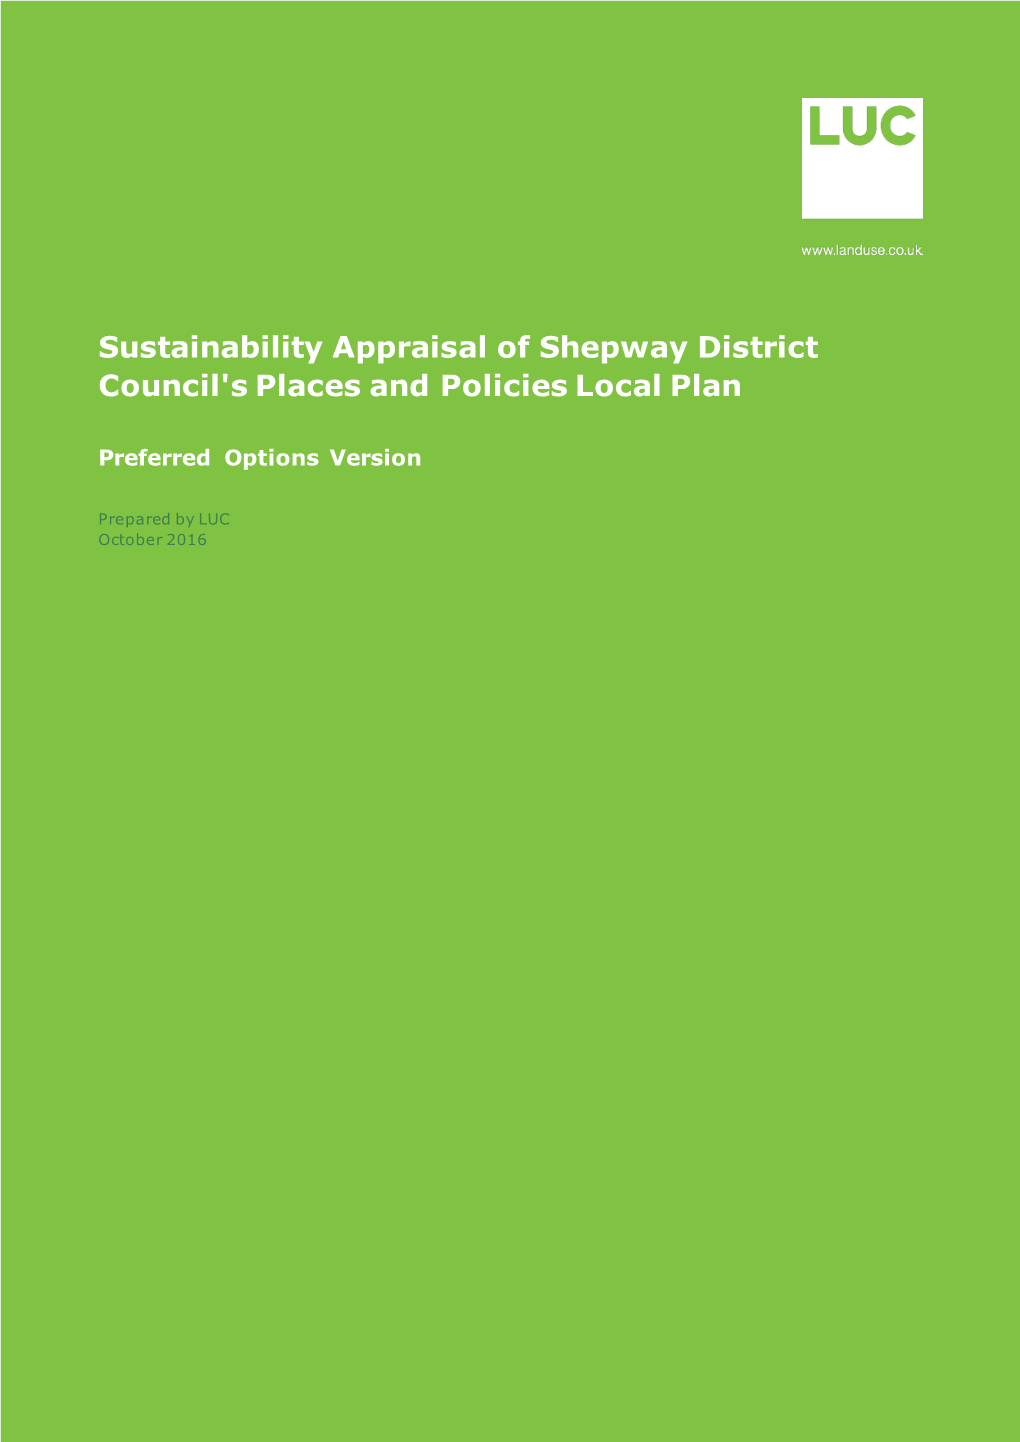 Sustainability Appraisal of Shepway District Council's Places and Policies Local Plan